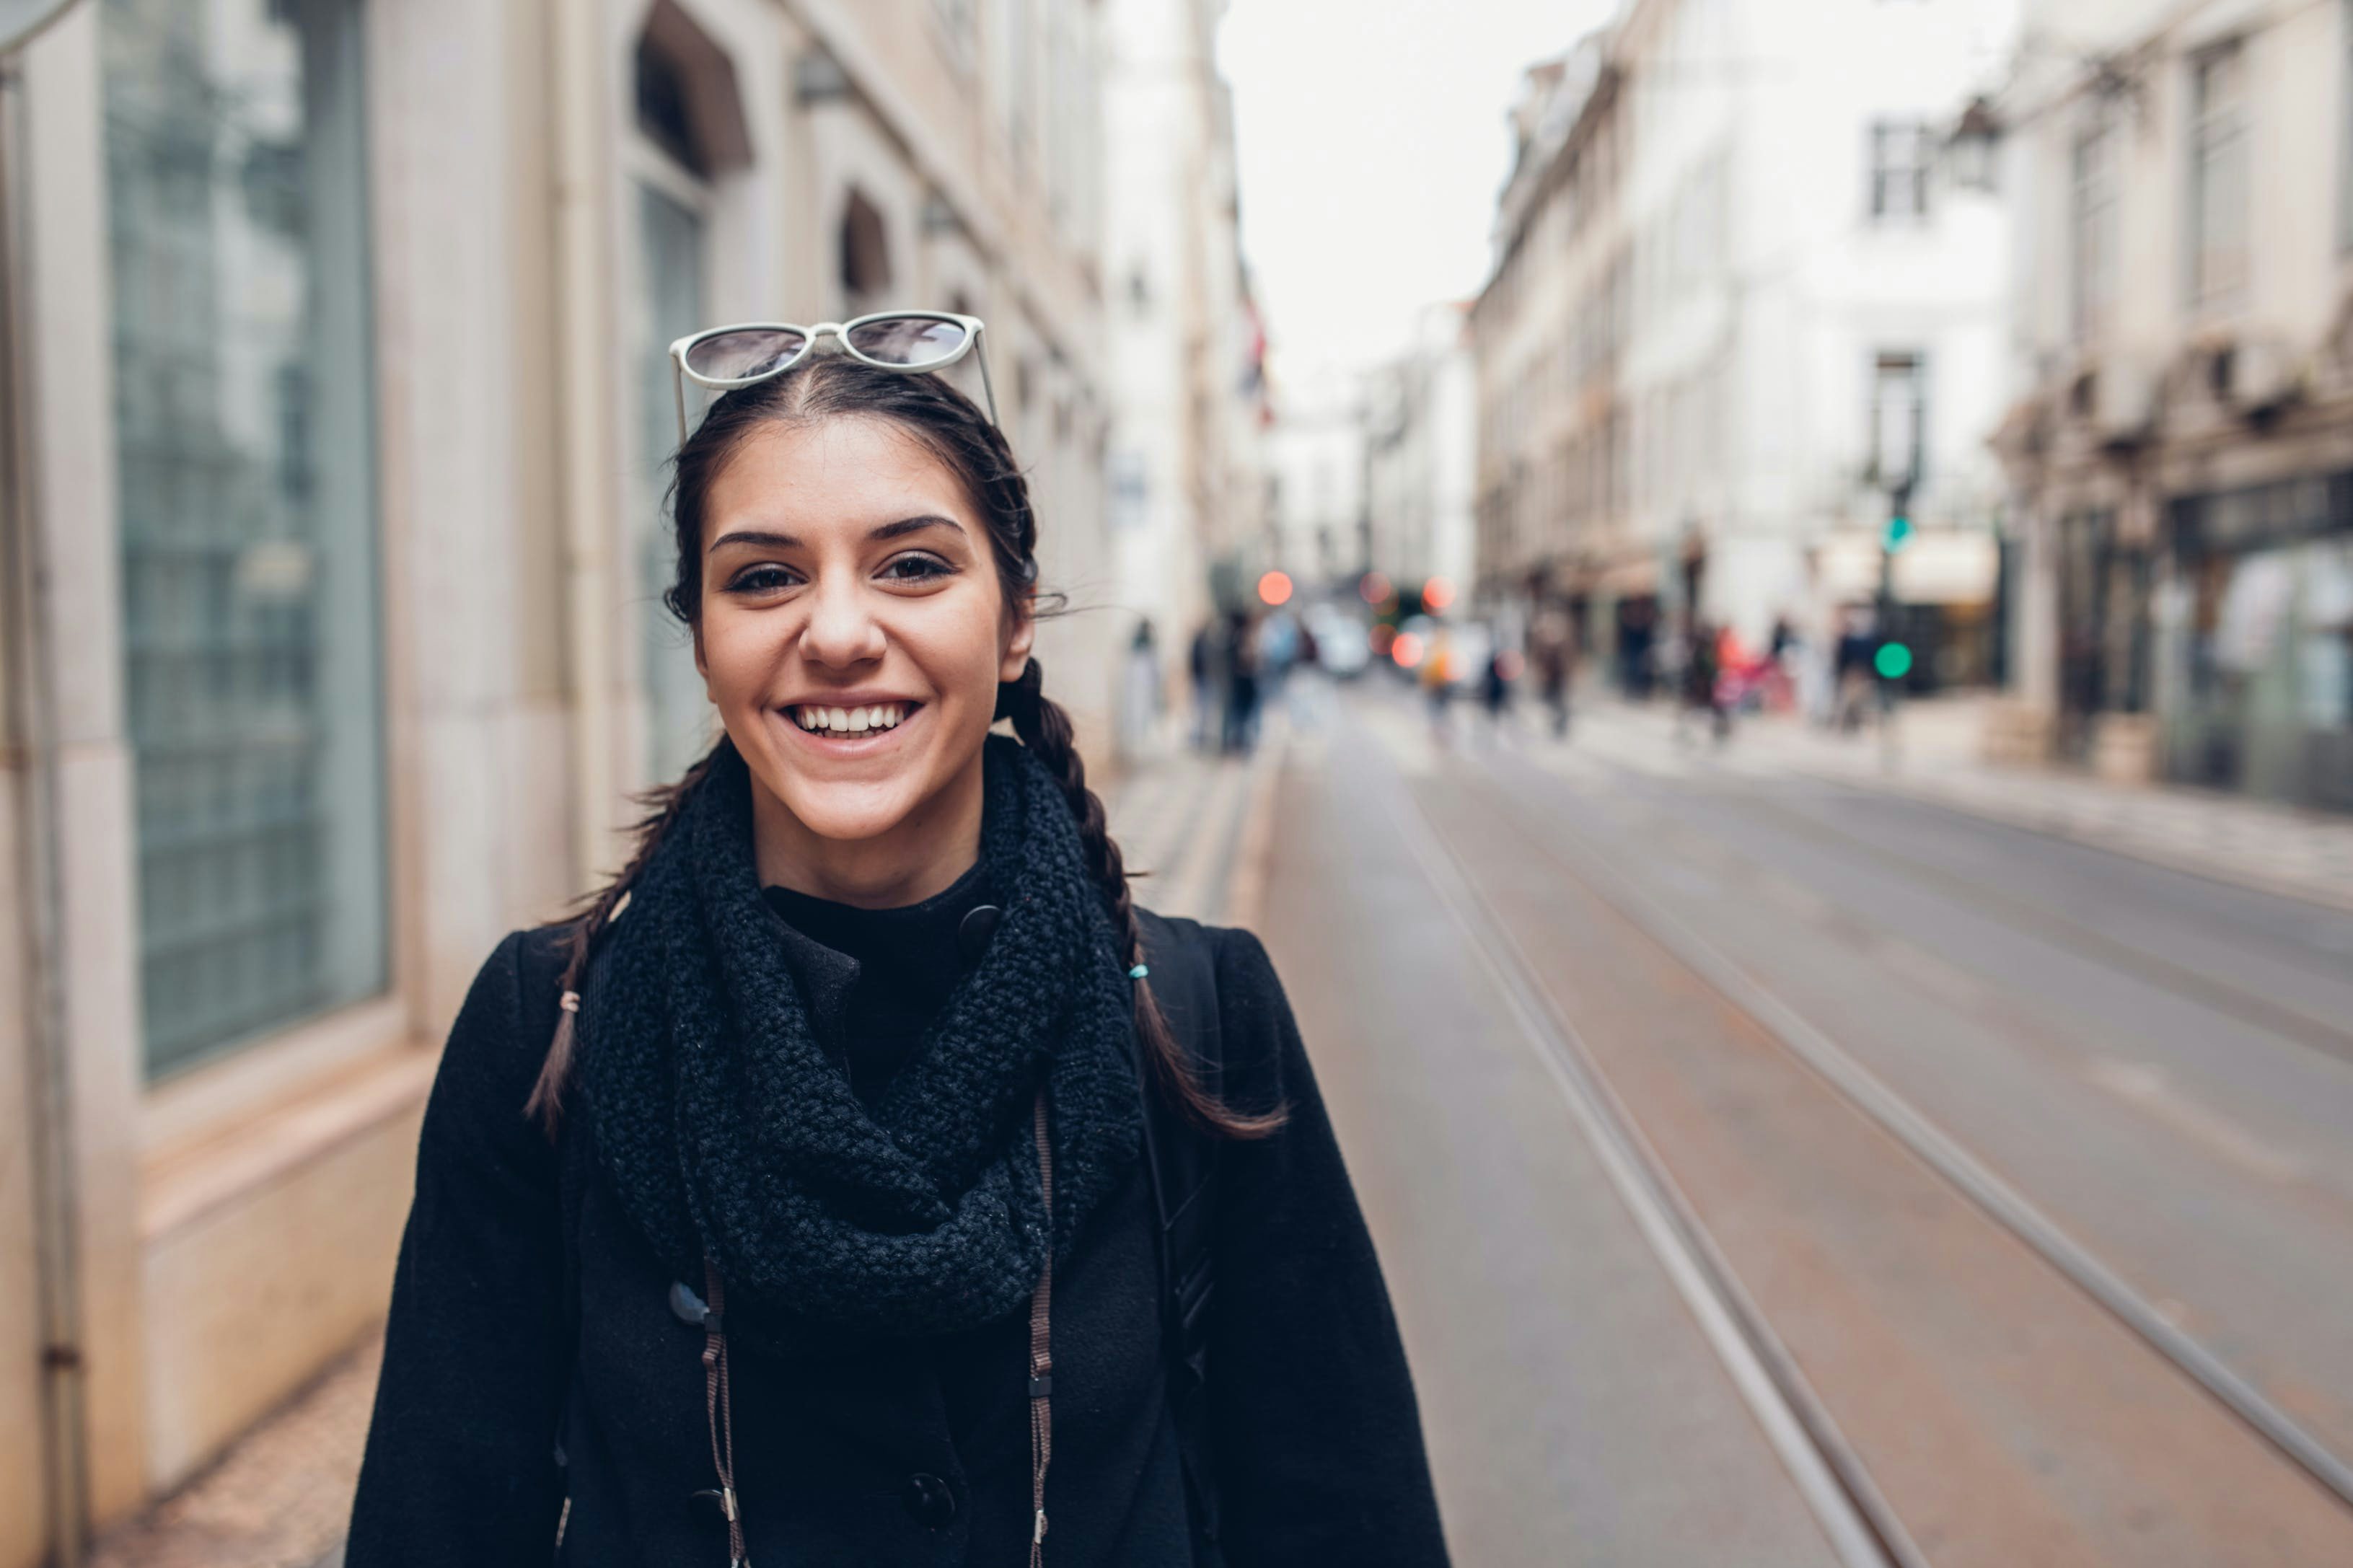 A picture of a woman smiling on a city street